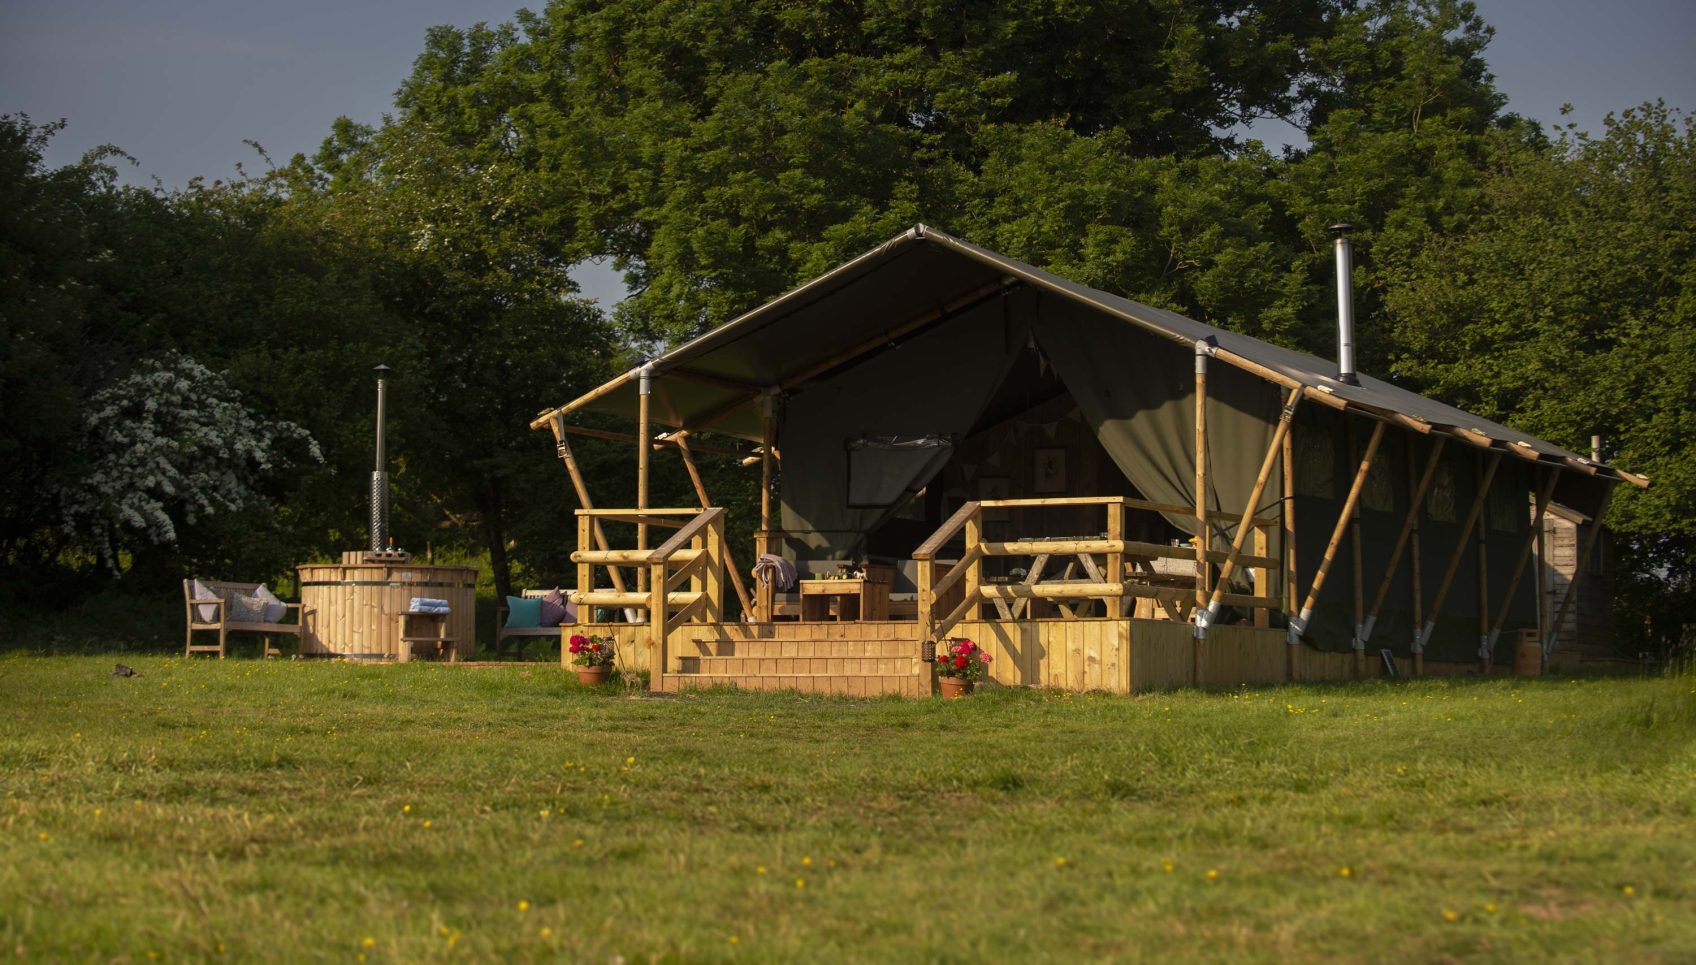 Exterior of a luxury Glamping Safari Tent at Cuckoo Down Farm in Exeter Devon